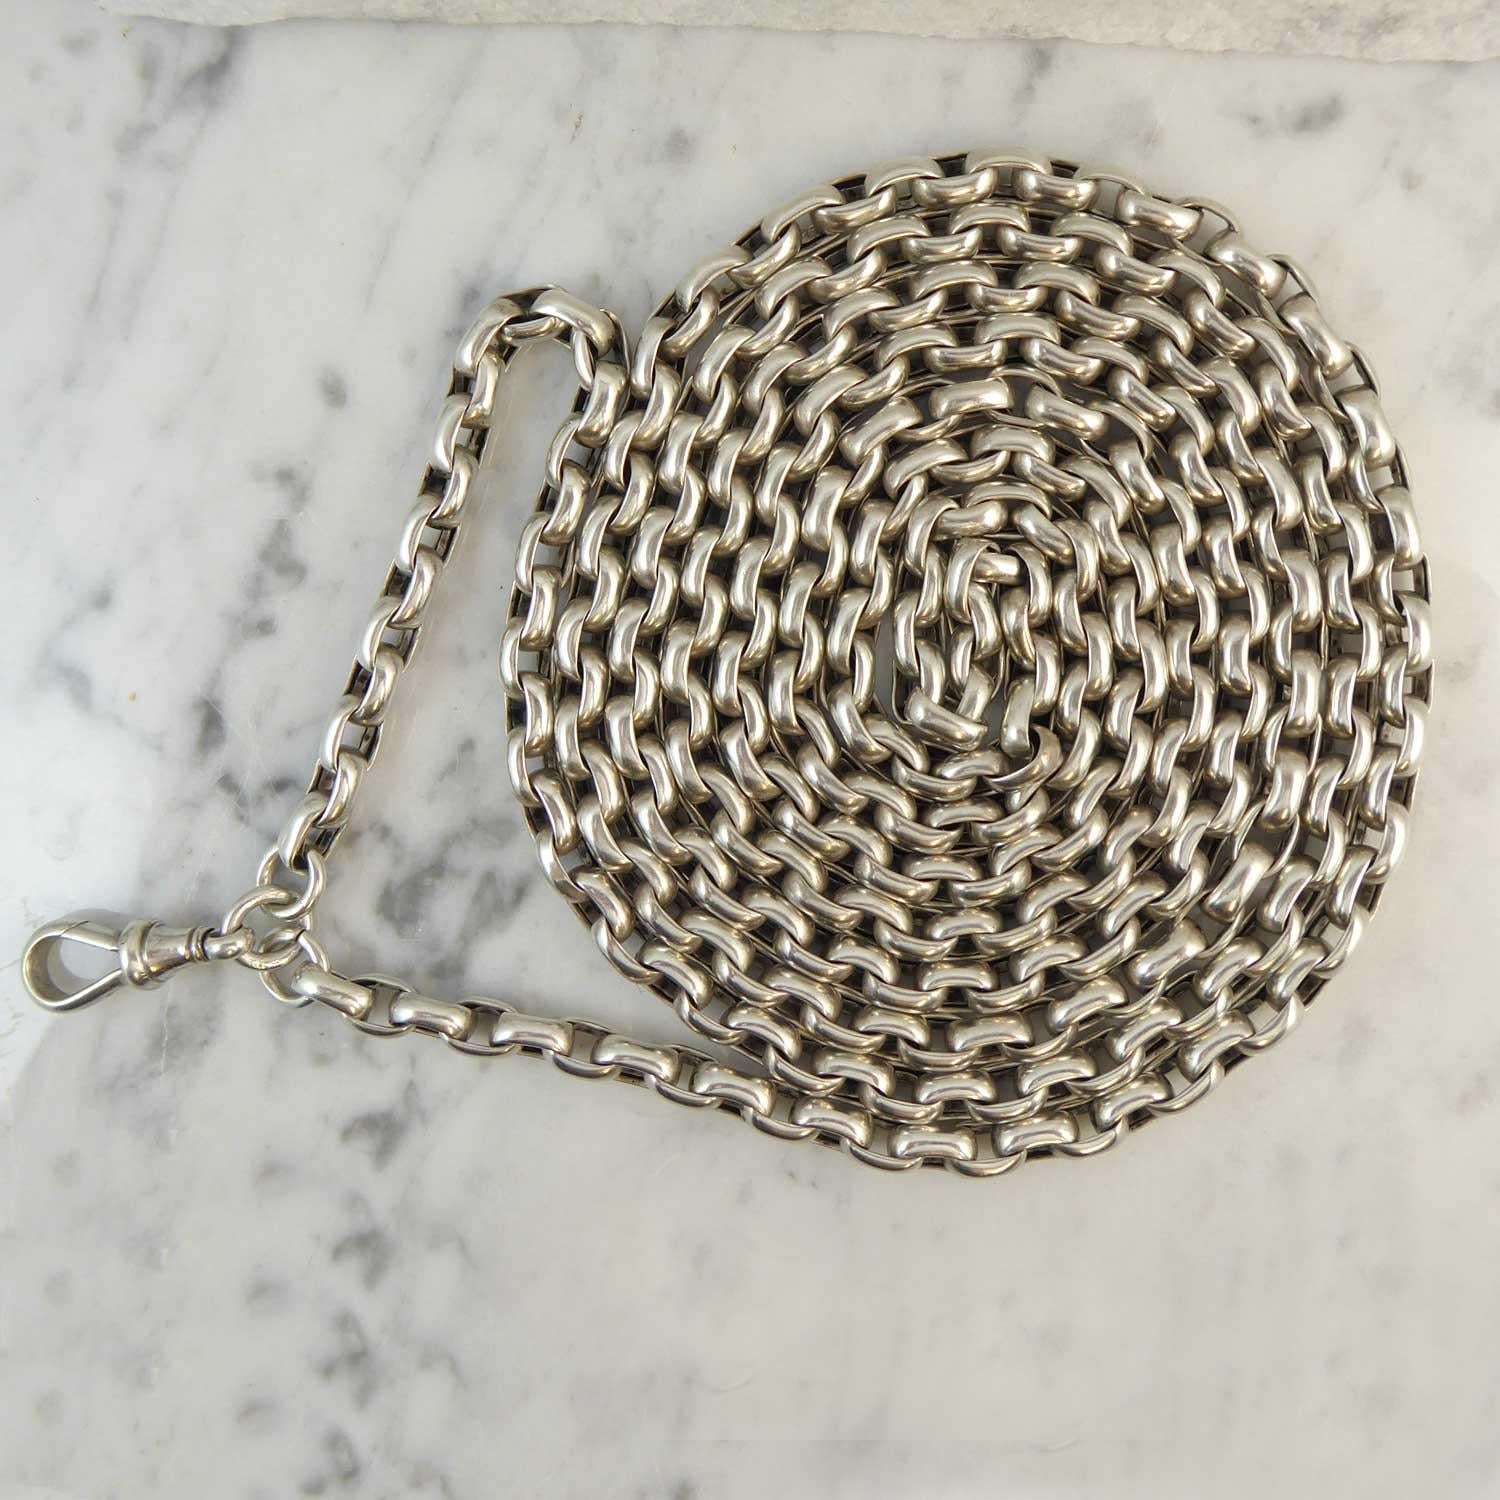 A fabulous antique silver chain from the Victorian era created from a 60